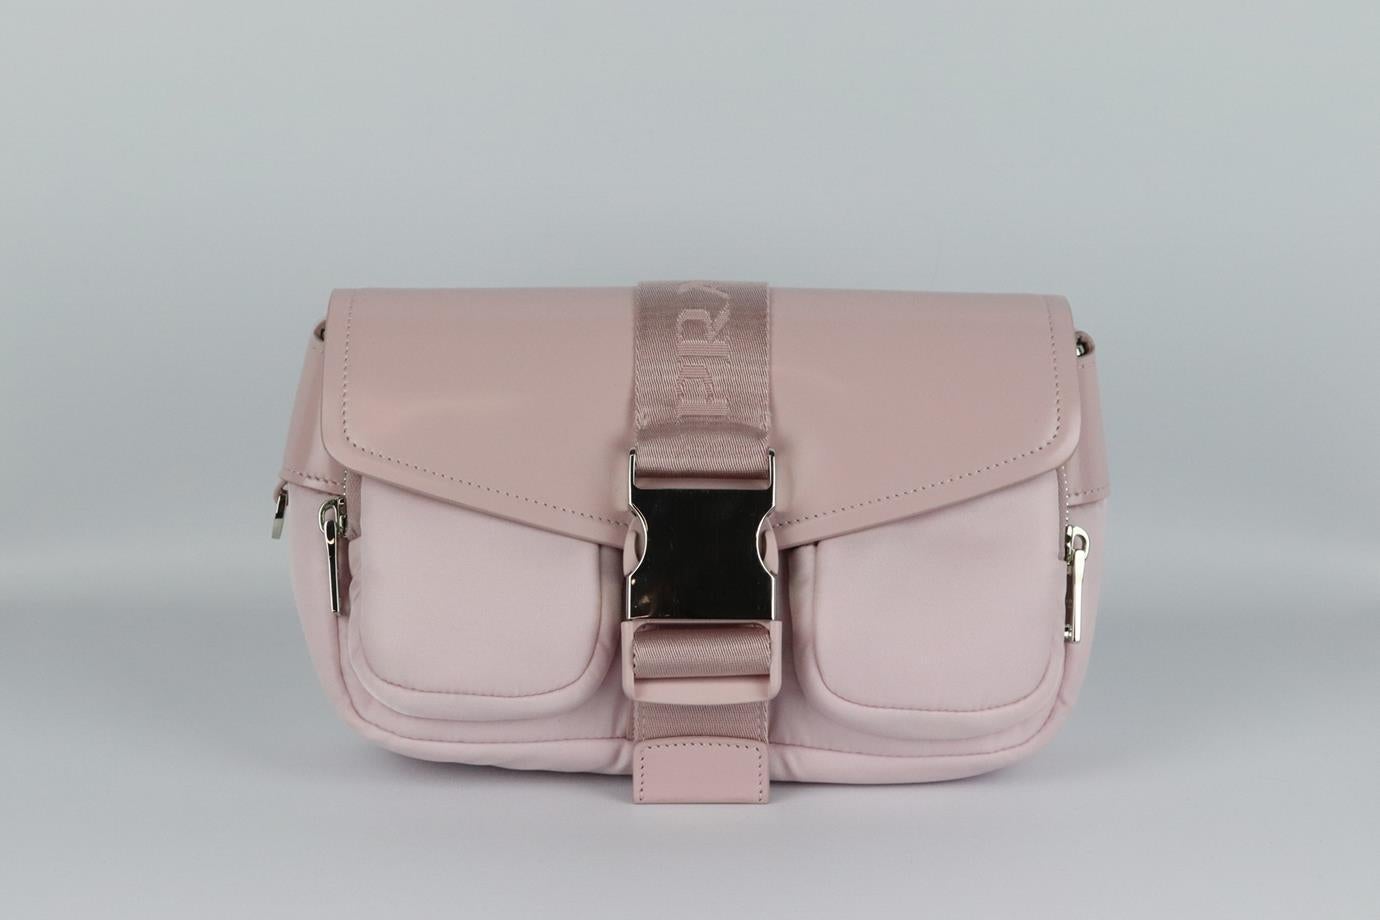 Prada Pocket leather and nylon shoulder bag. Pink. Buckle fastening at front. Does not come with dustbag or box. Height: 6.4 in. Width: 2 in. Depth: 5 in. Strap Drop: 34 in. Very good condition - Barely used. Light scratching to hardware; see